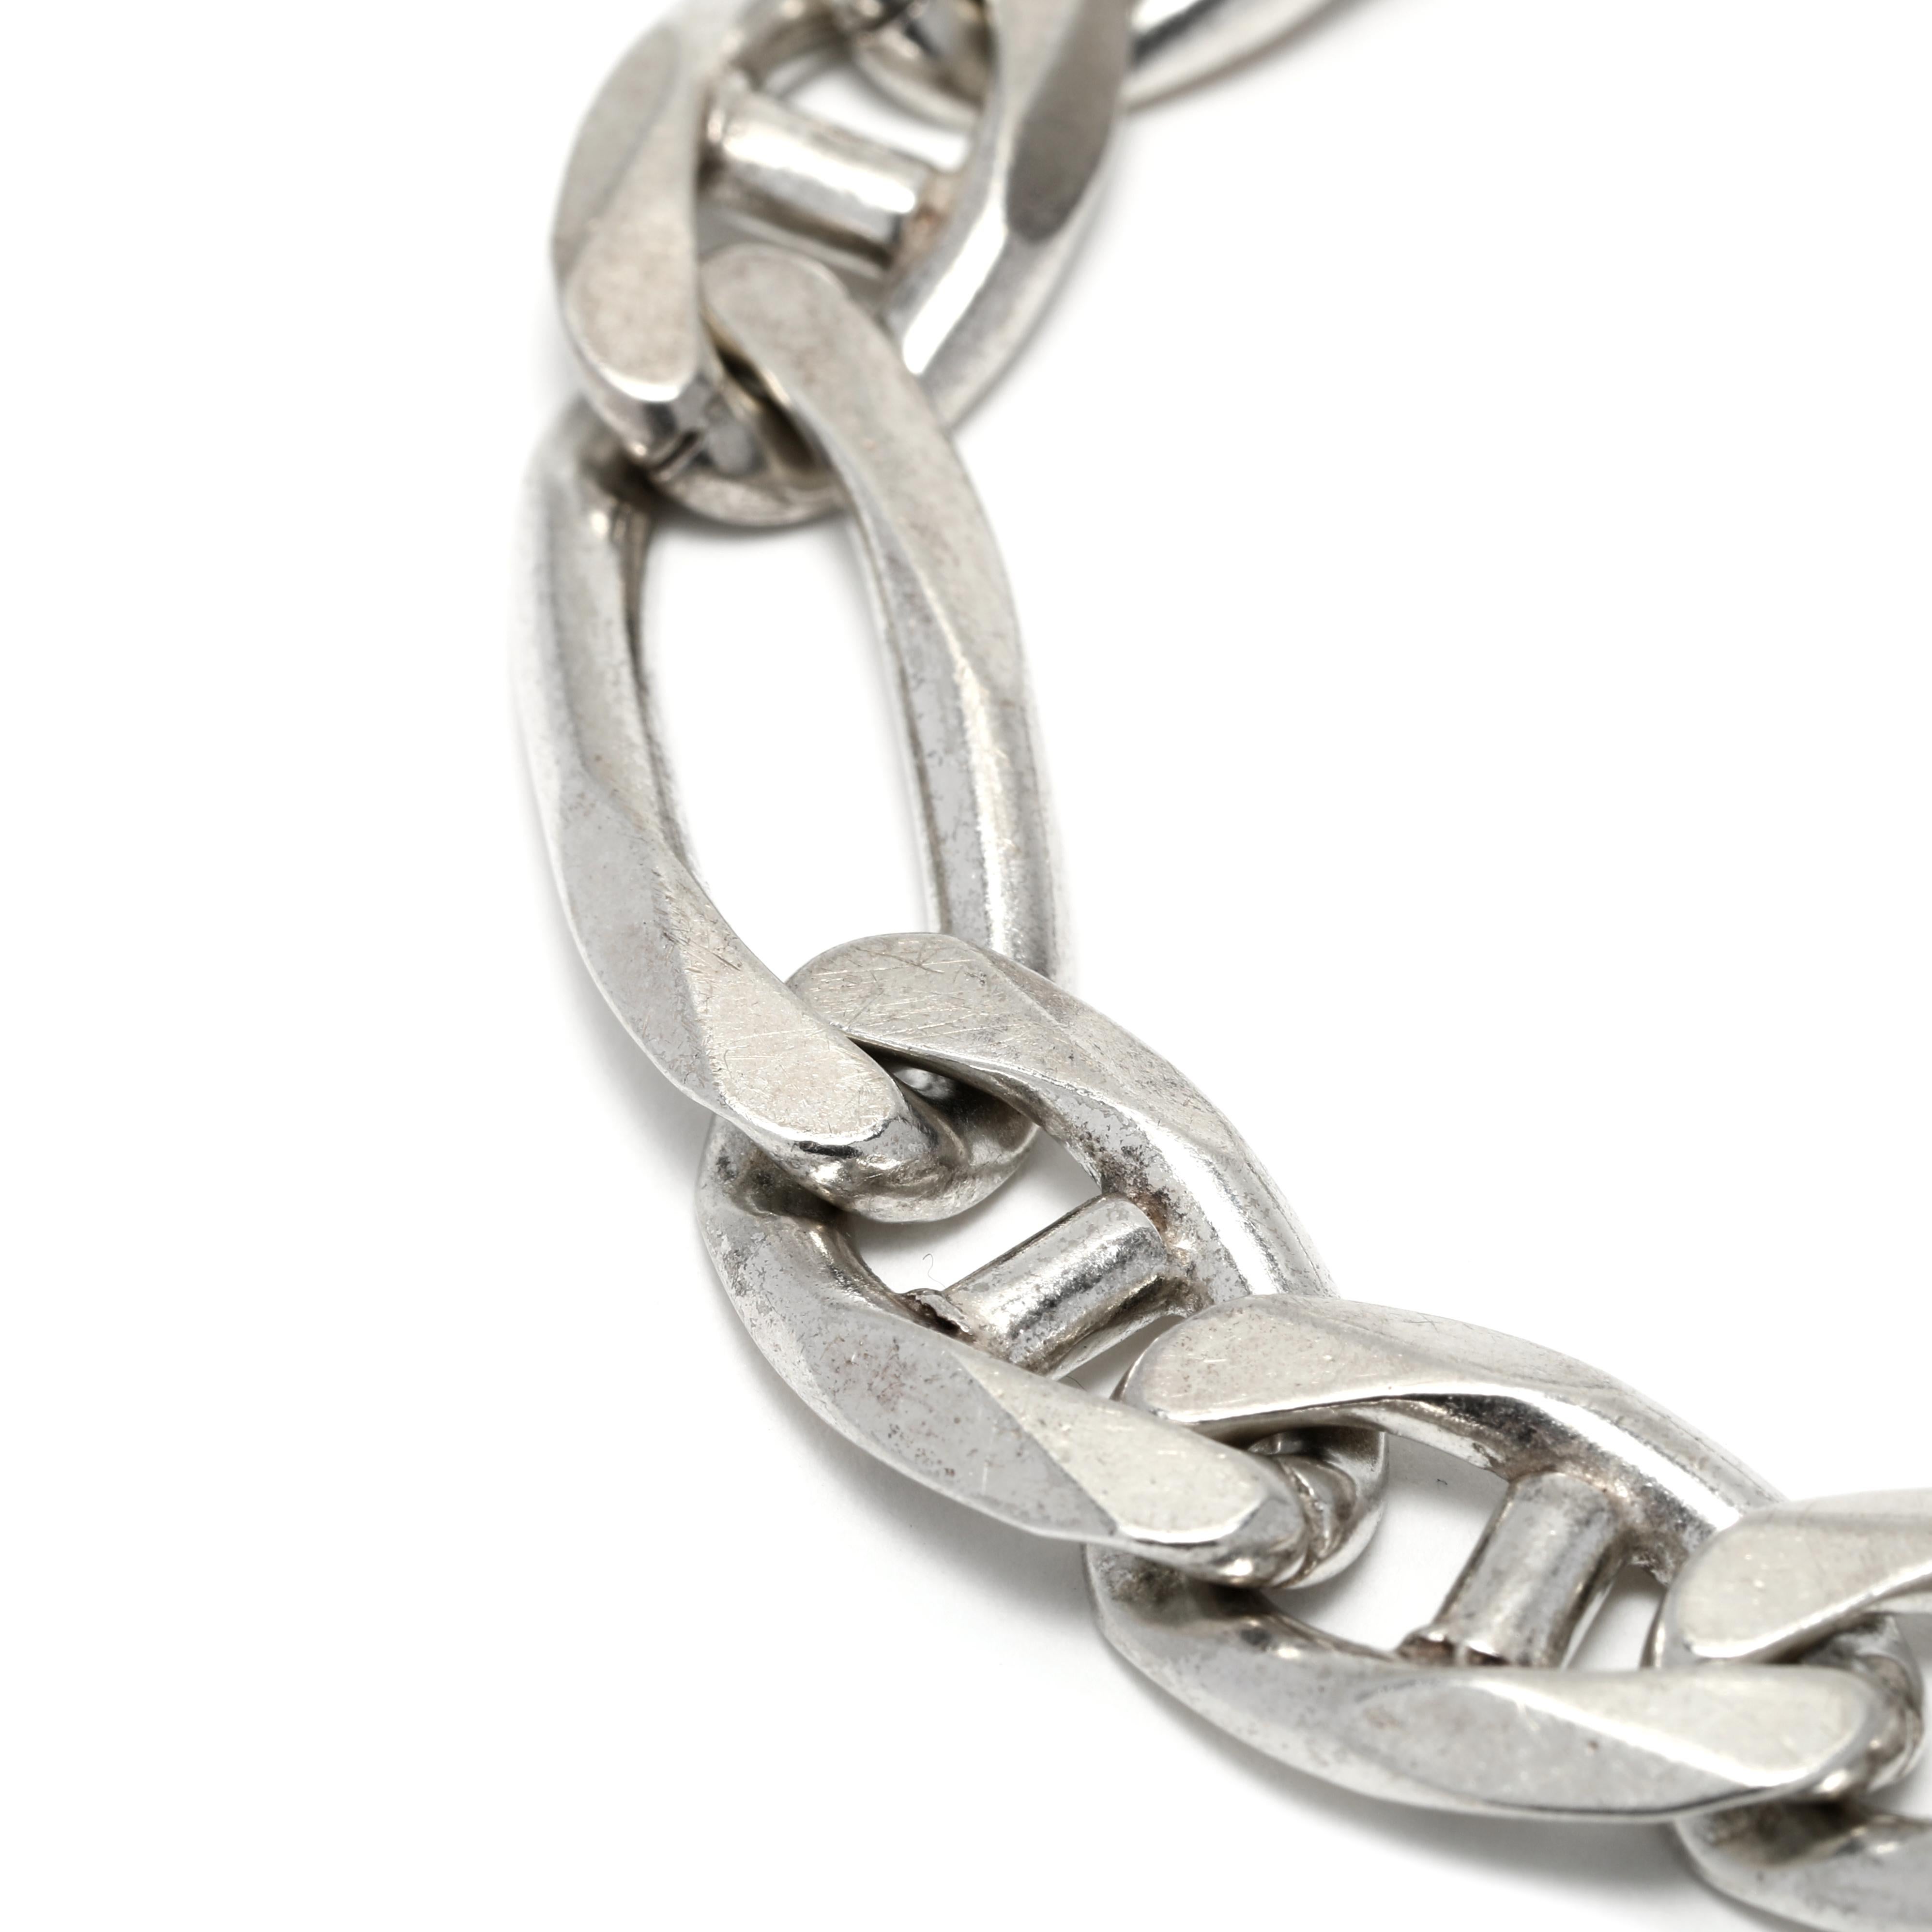 This vintage Italian Gent's Figaro Link Bracelet is the perfect everyday accessory. Crafted of sterling silver, this large Figaro bracelet has an impressive length of 7.75 inches. The intricate Figaro links create a classic look that will never go